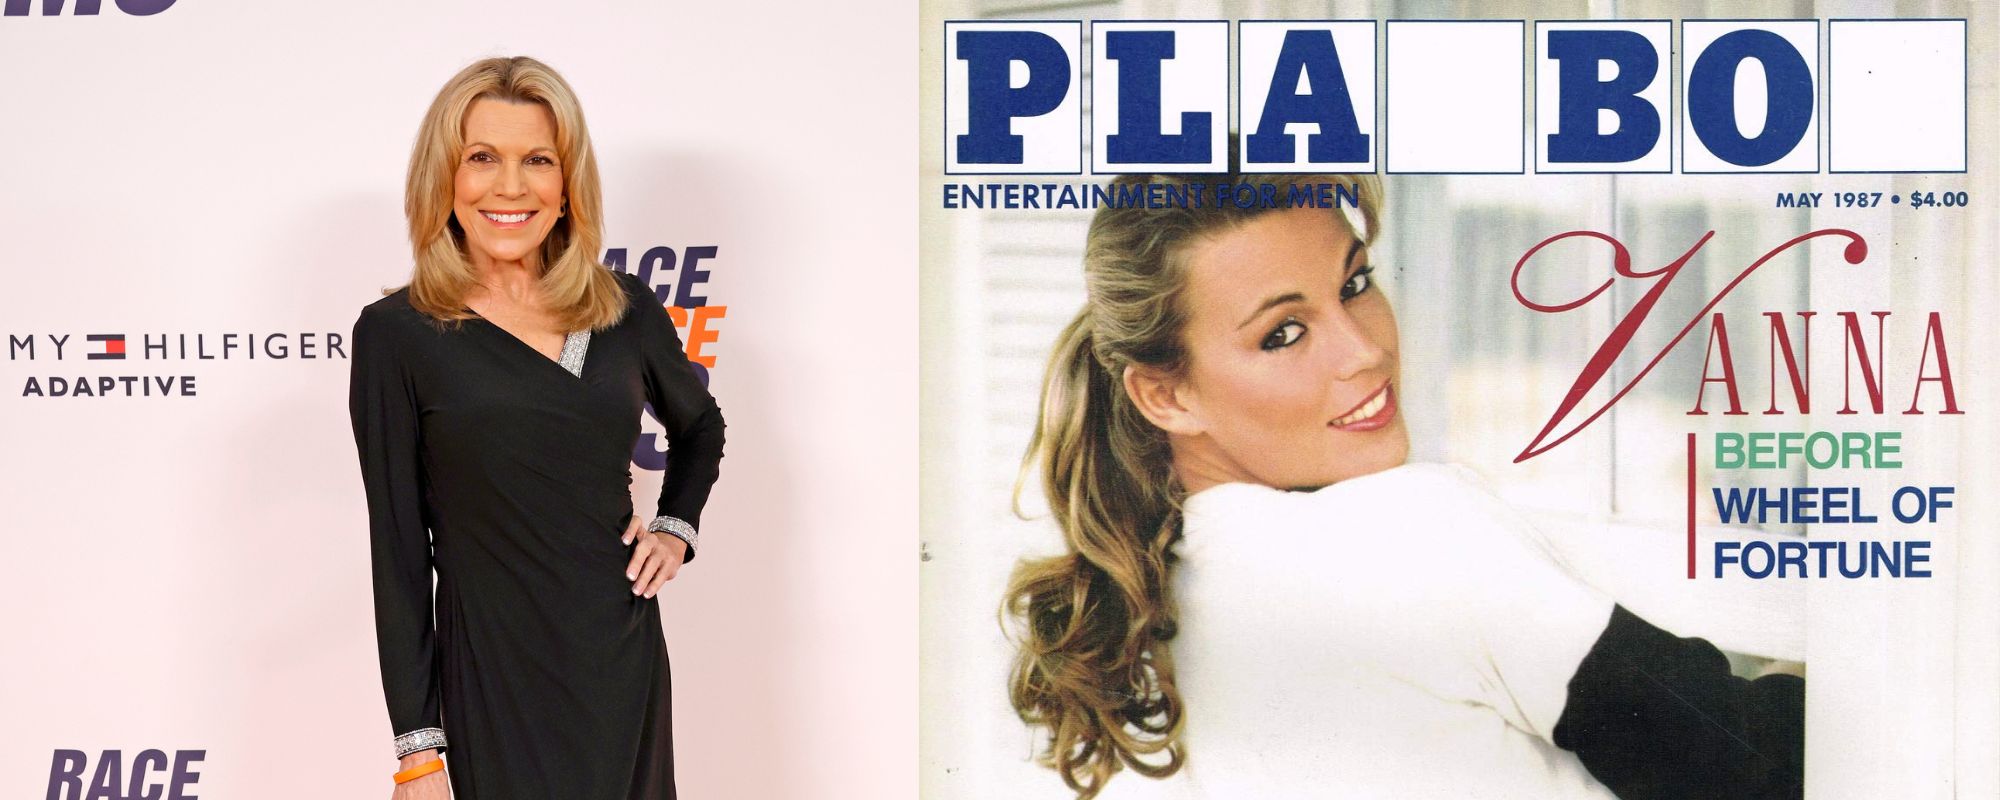 bev ireland recommends pictures of vanna white in playboy magazine pic